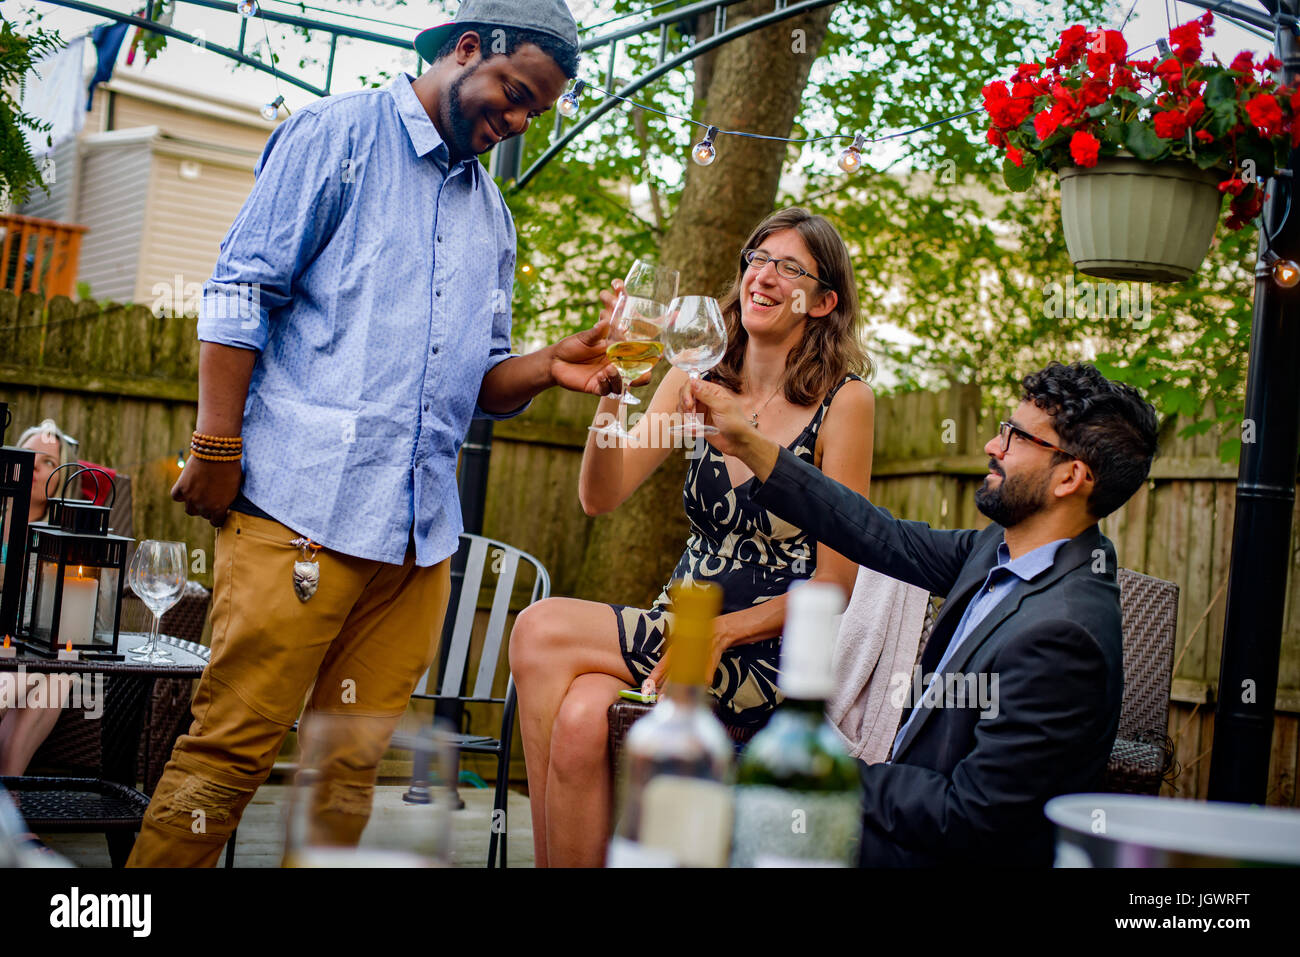 Three people at garden party, holding wine glasses, making a toast Stock Photo